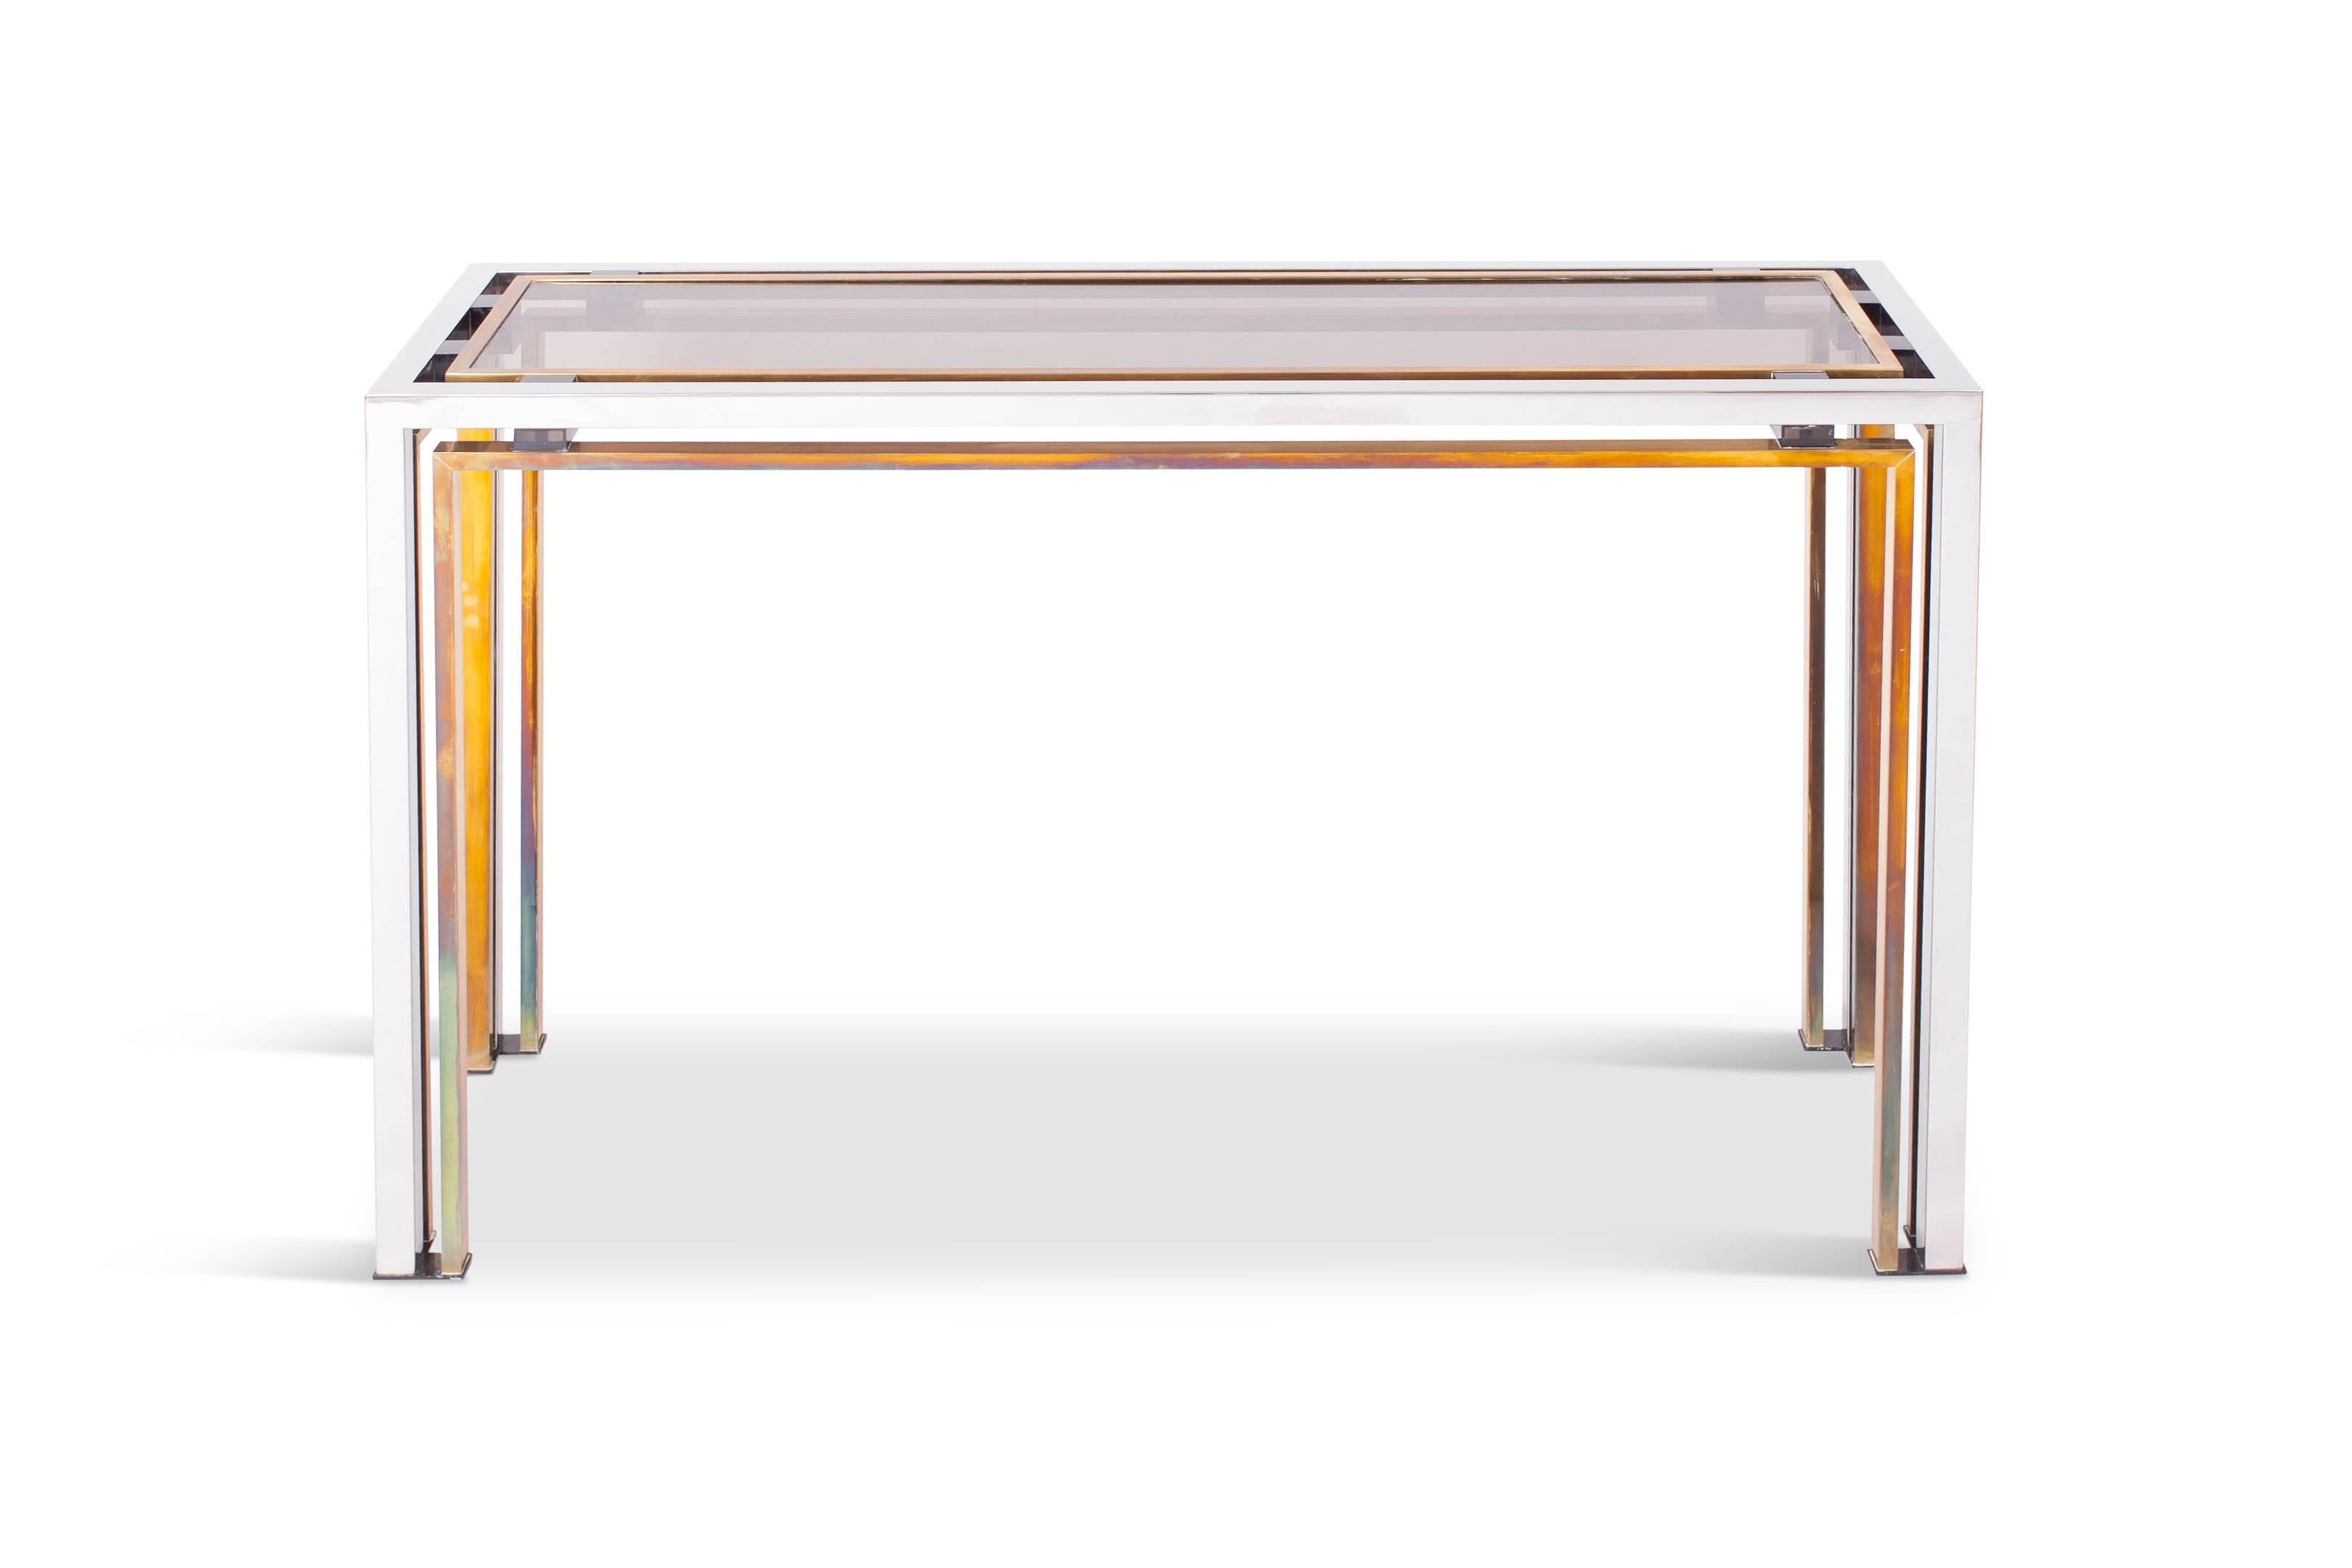 Hollywood regency mid-century modern console table by Italian designer Rome Rega, Italy, 1970s

The sculptural chrome and brass frame is contrasting nicely with the smoked
glass top which is held in place with purple perspex details

 Eclectic 